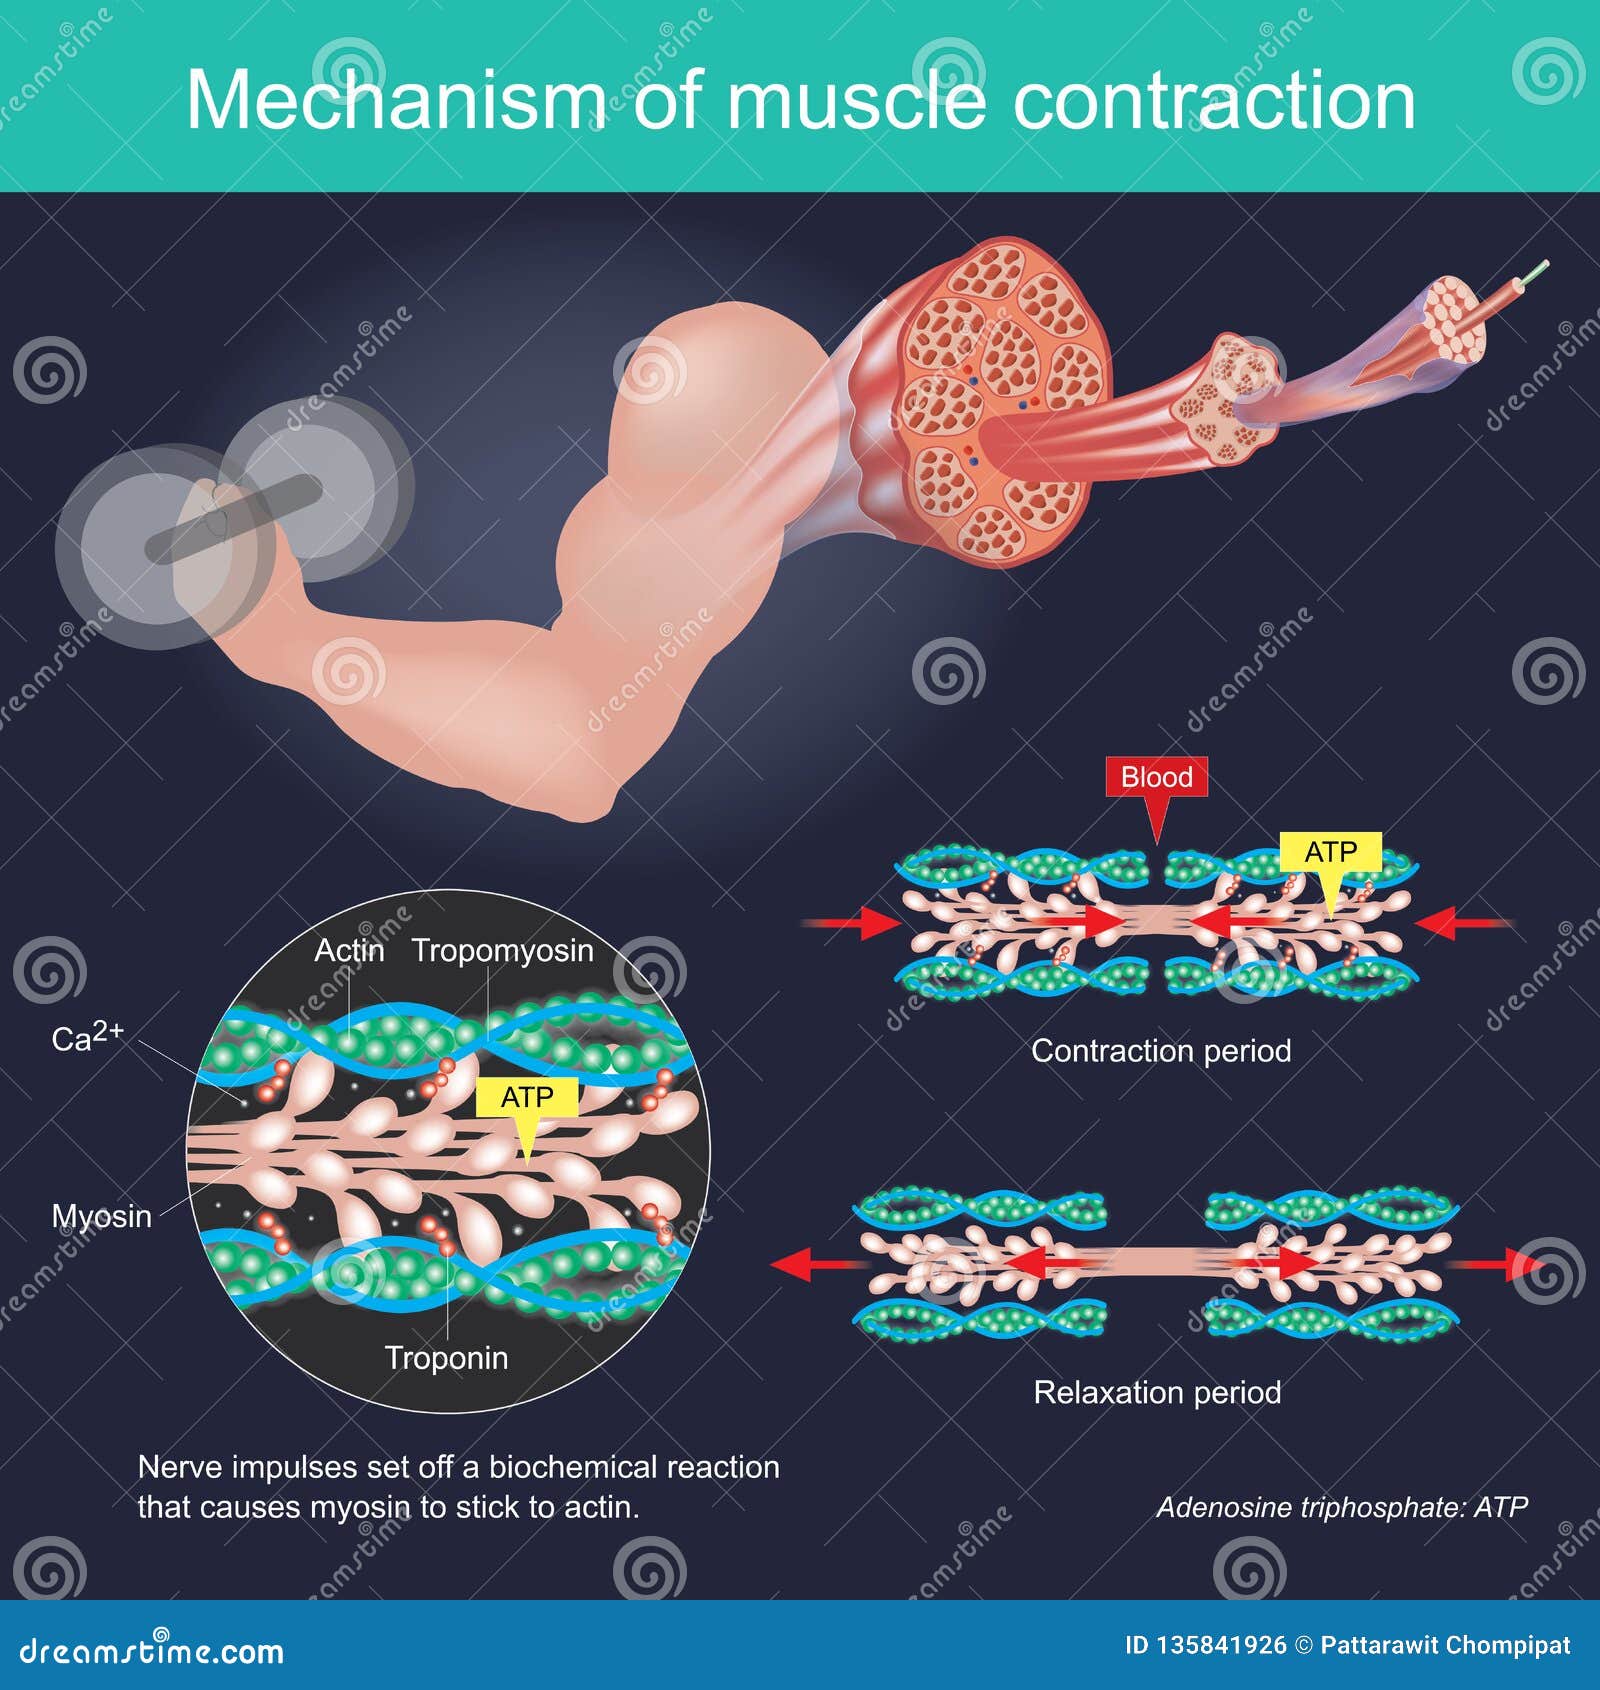 the muscle contraction as a result of nerve impulses set off a biochemical reaction that causes myosin to stick to actin. human